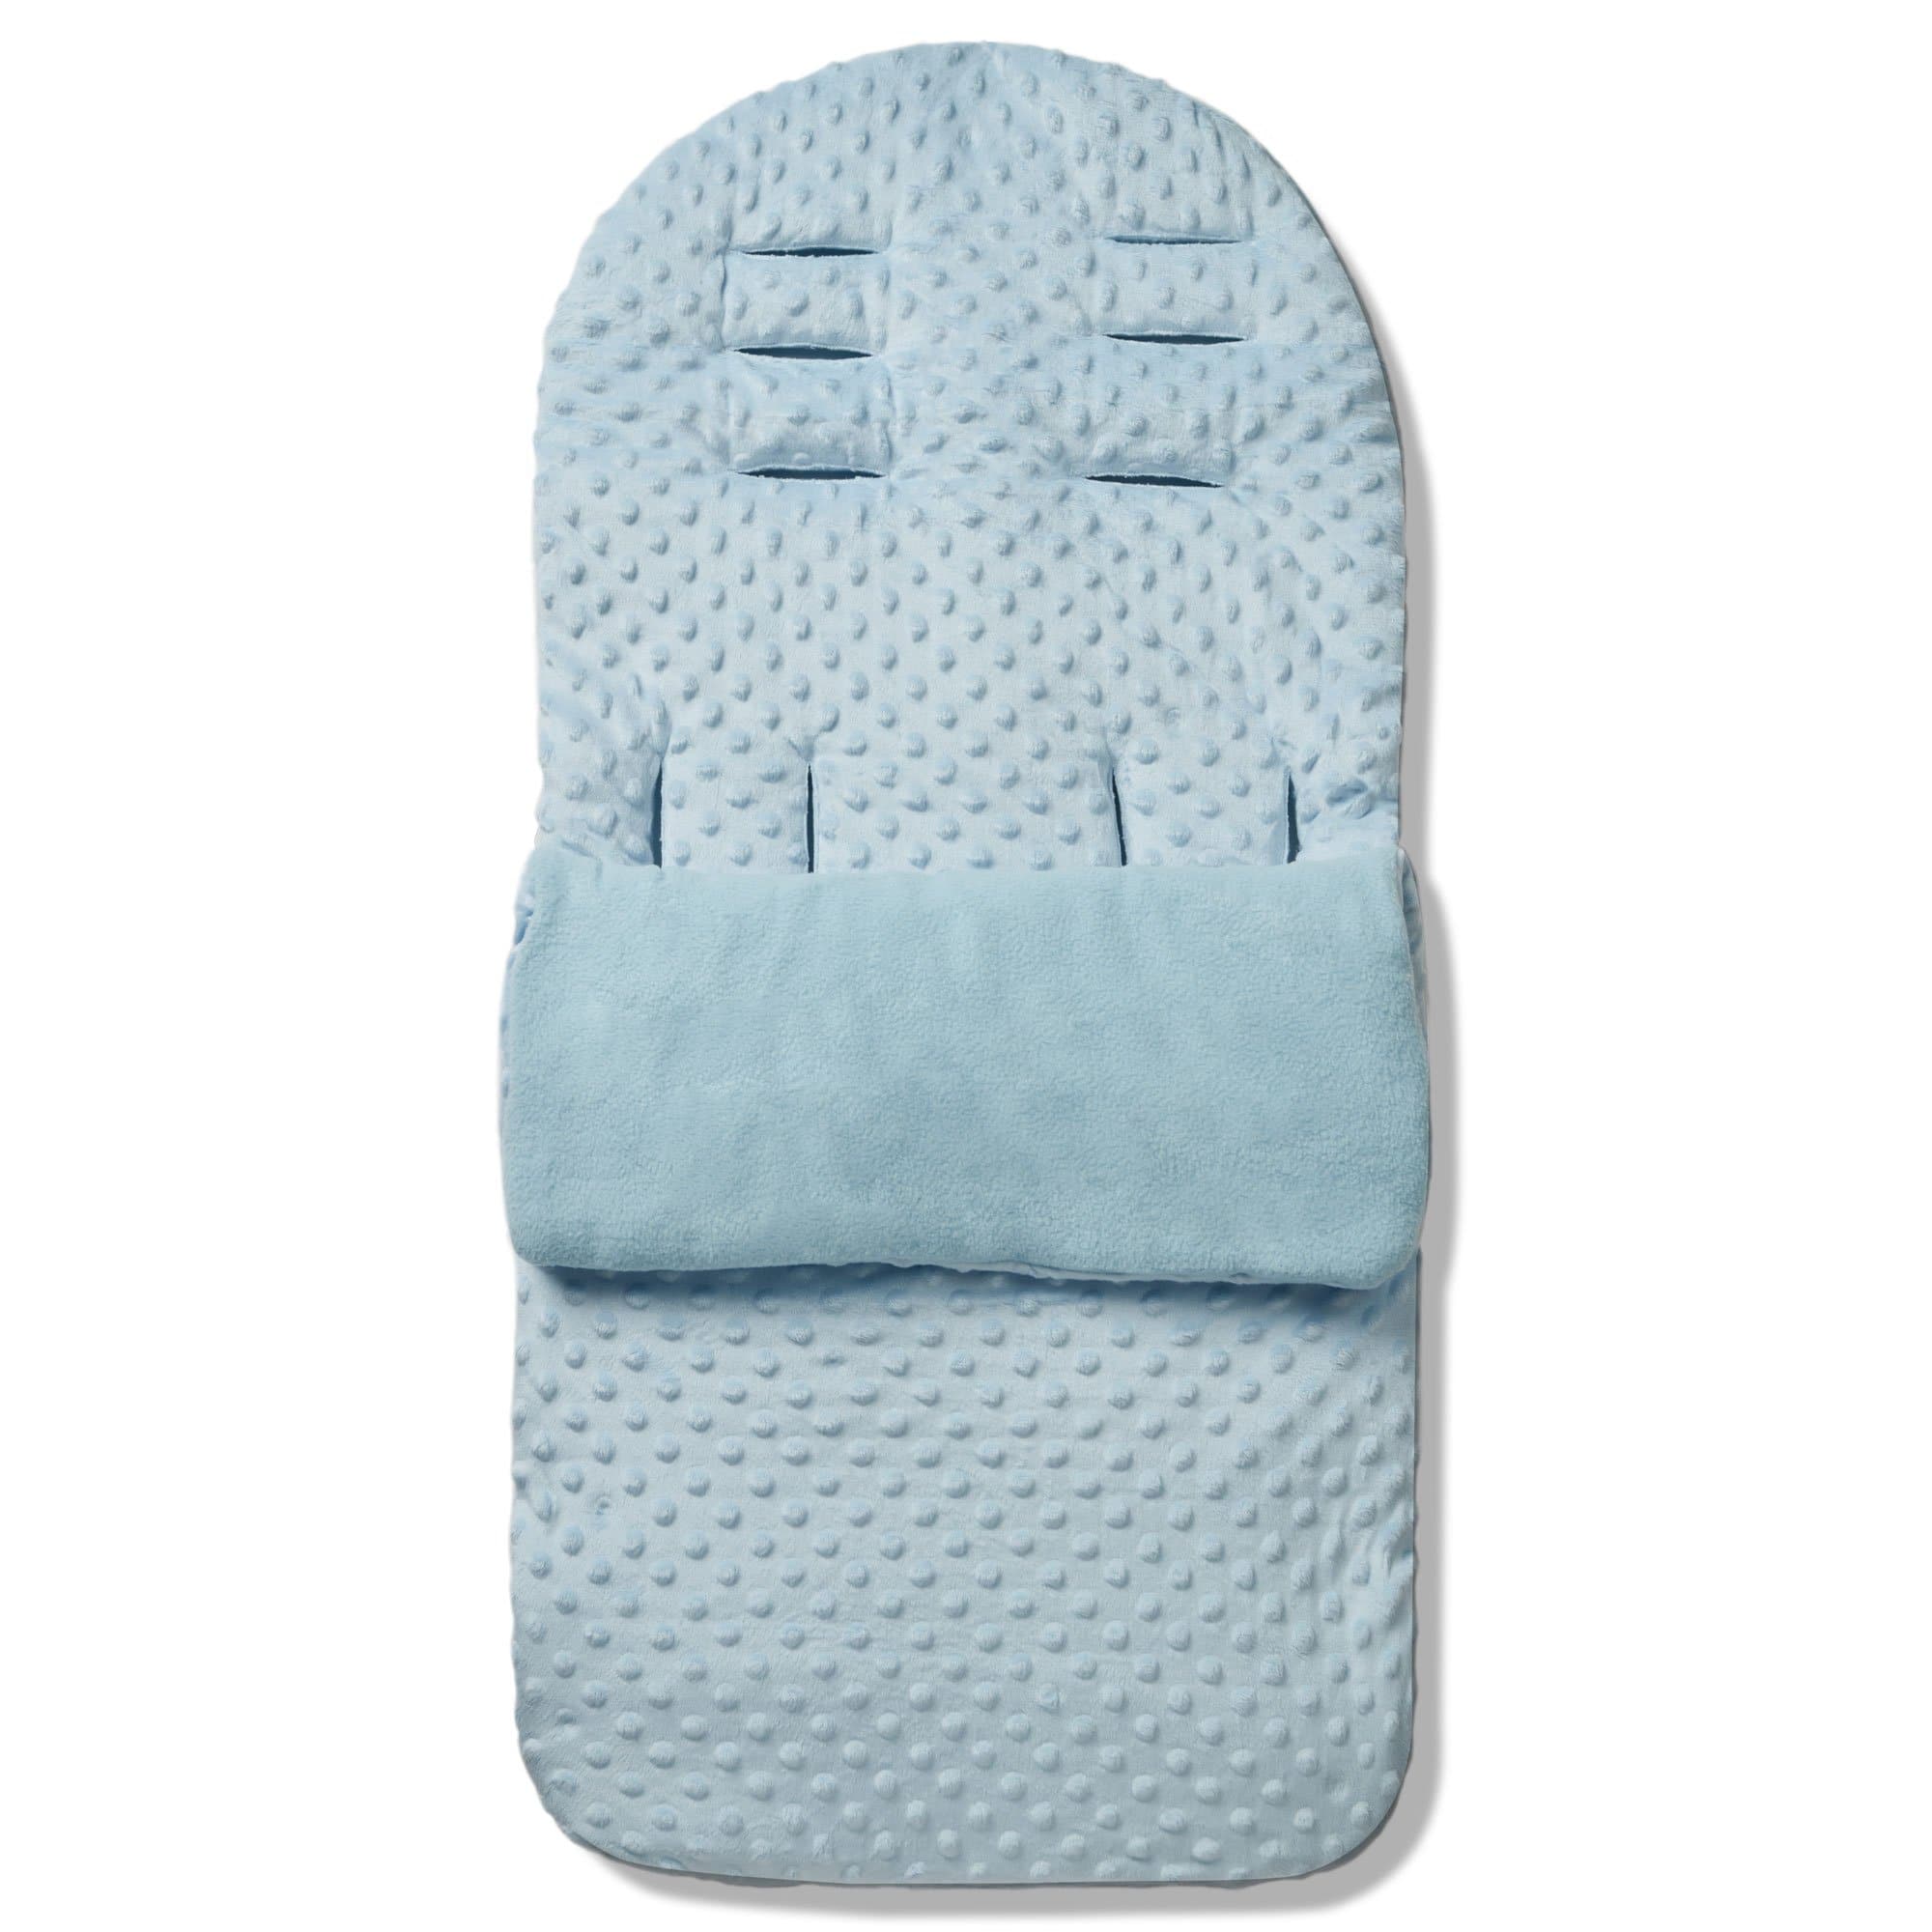 Dimple Footmuff / Cosy Toes Compatible with Baby Elegance - Blue / Fits All Models | For Your Little One